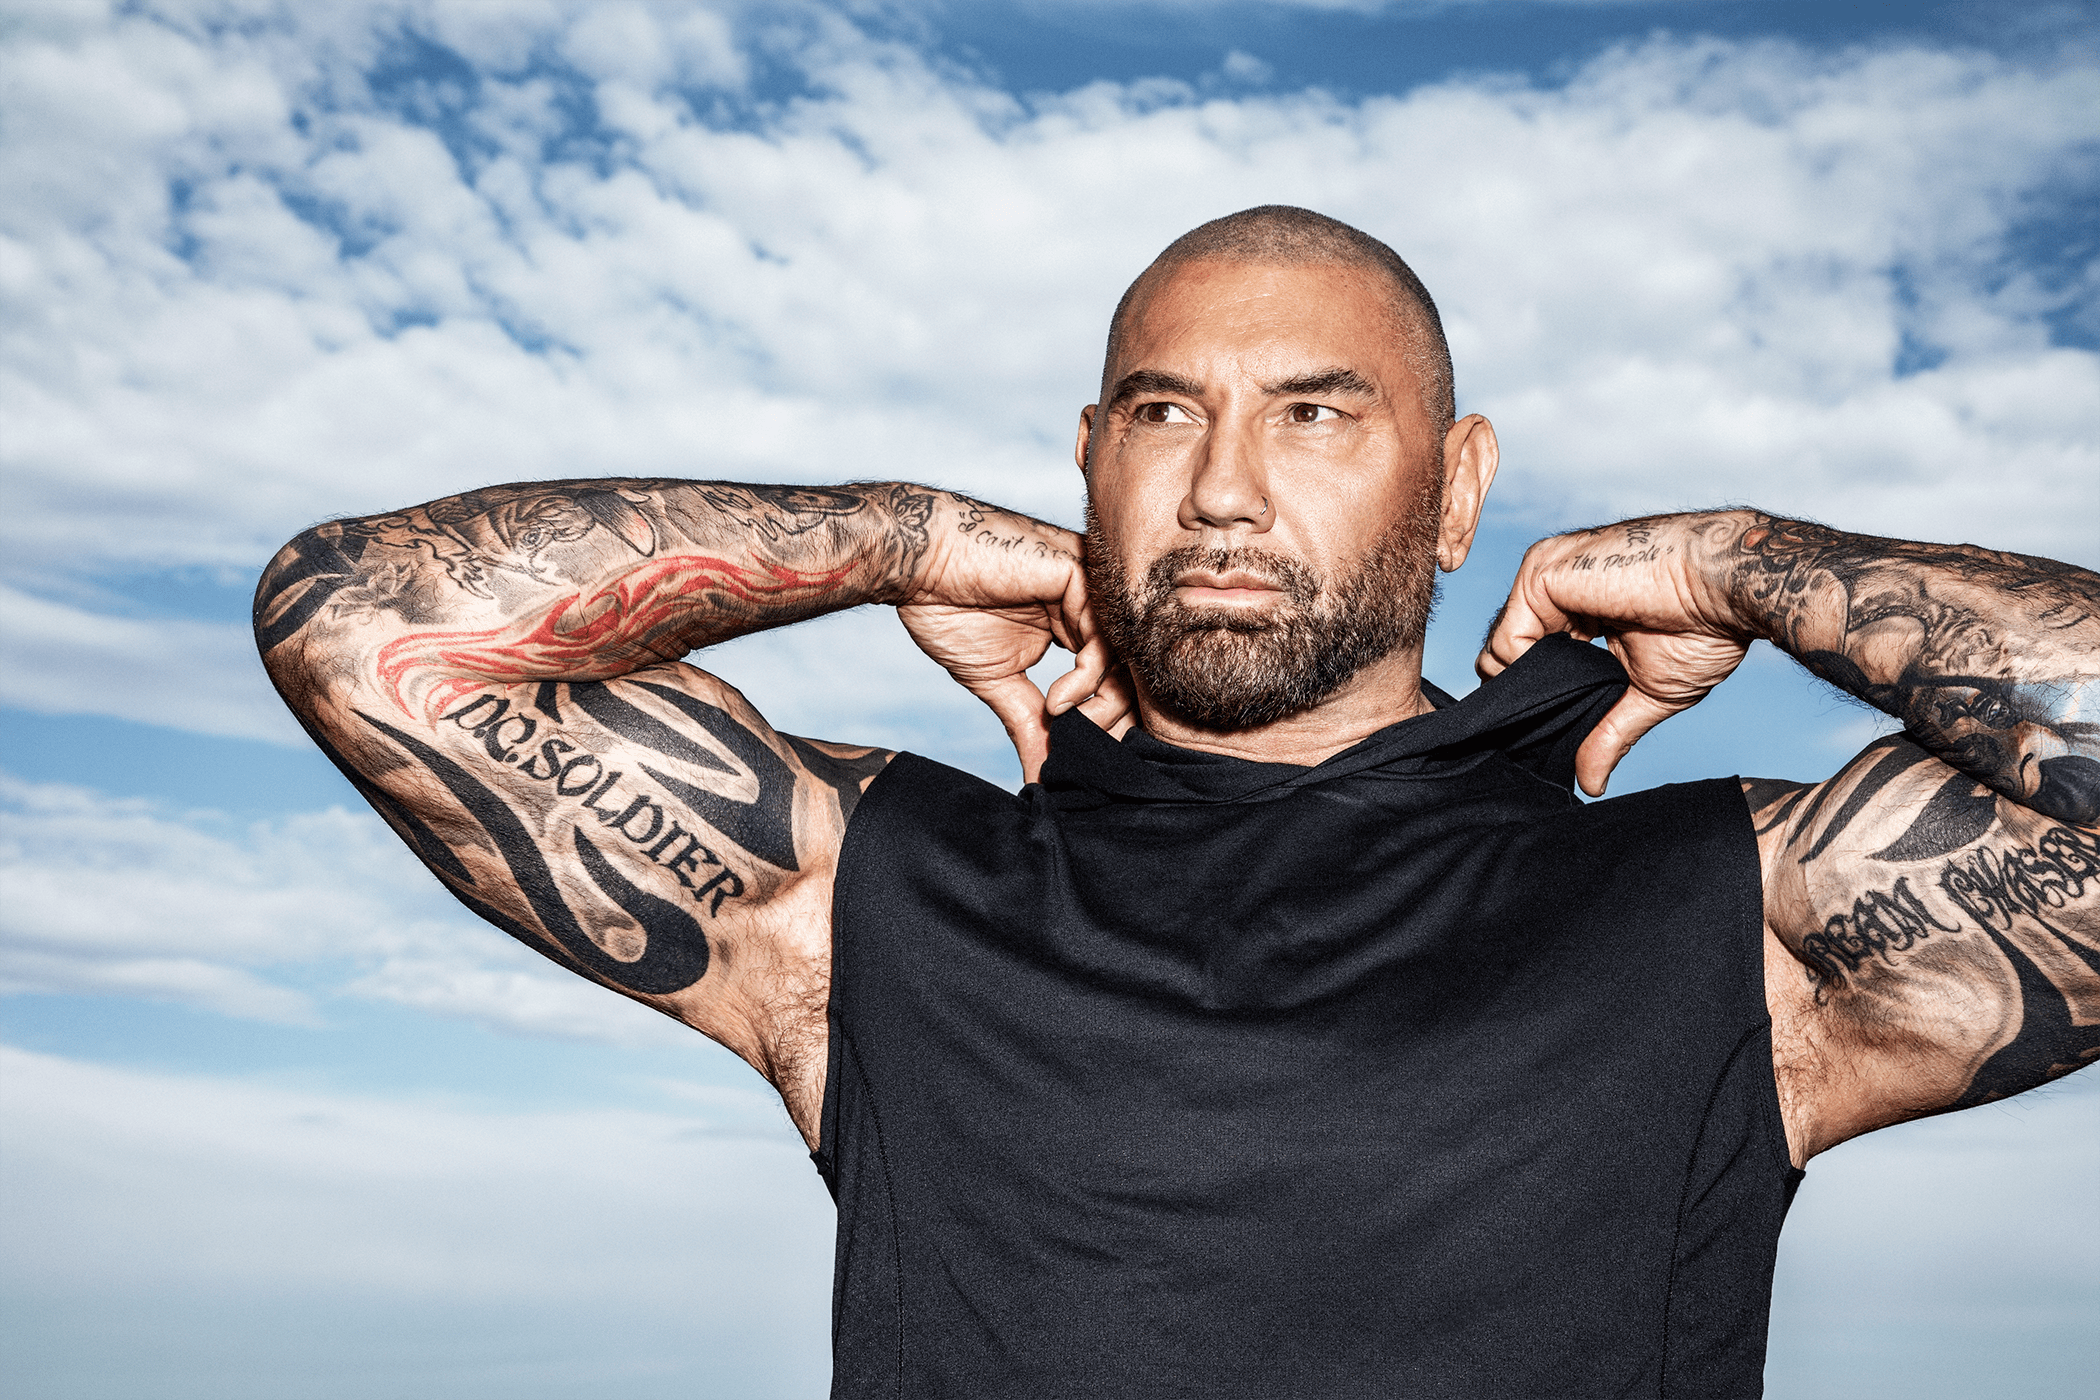 Dave Bautista on the heartbreak that kept him from celebrating